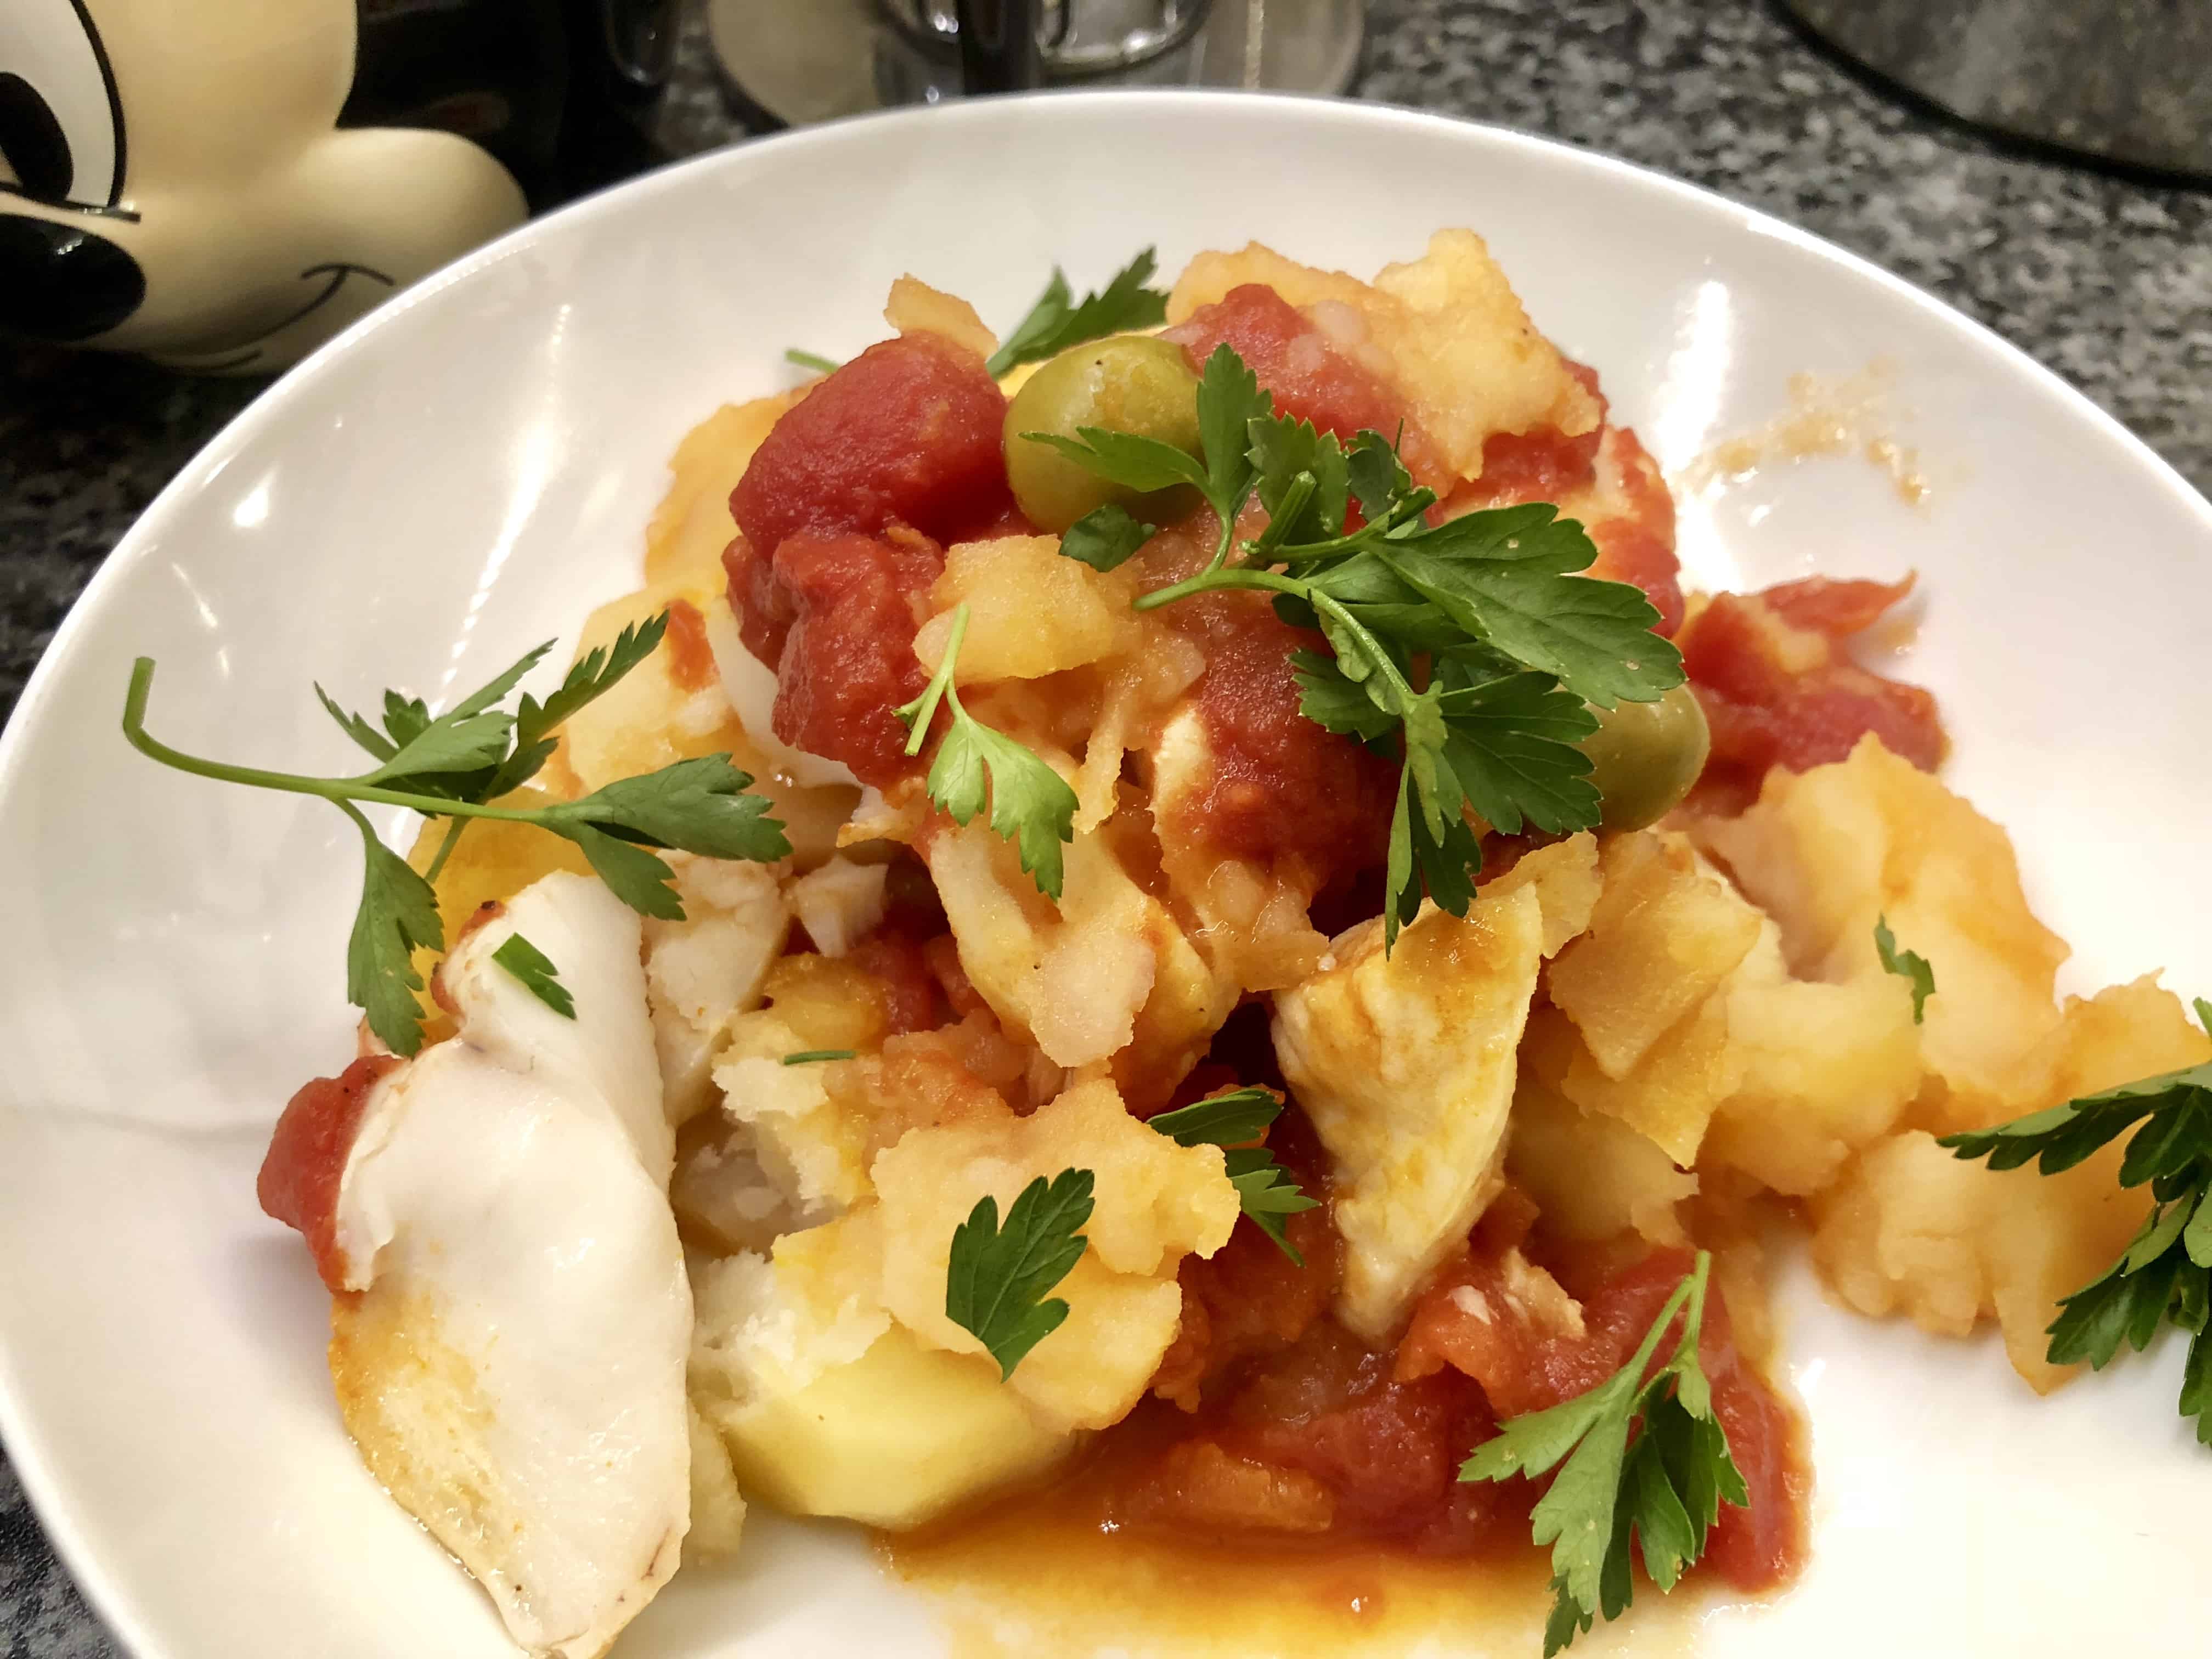 https://www.feistytapas.com/wp-content/uploads/2019/07/Instant-Pot-Fish-and-Potatoes-in-Tomato-Sauce-with-Olives-.jpg